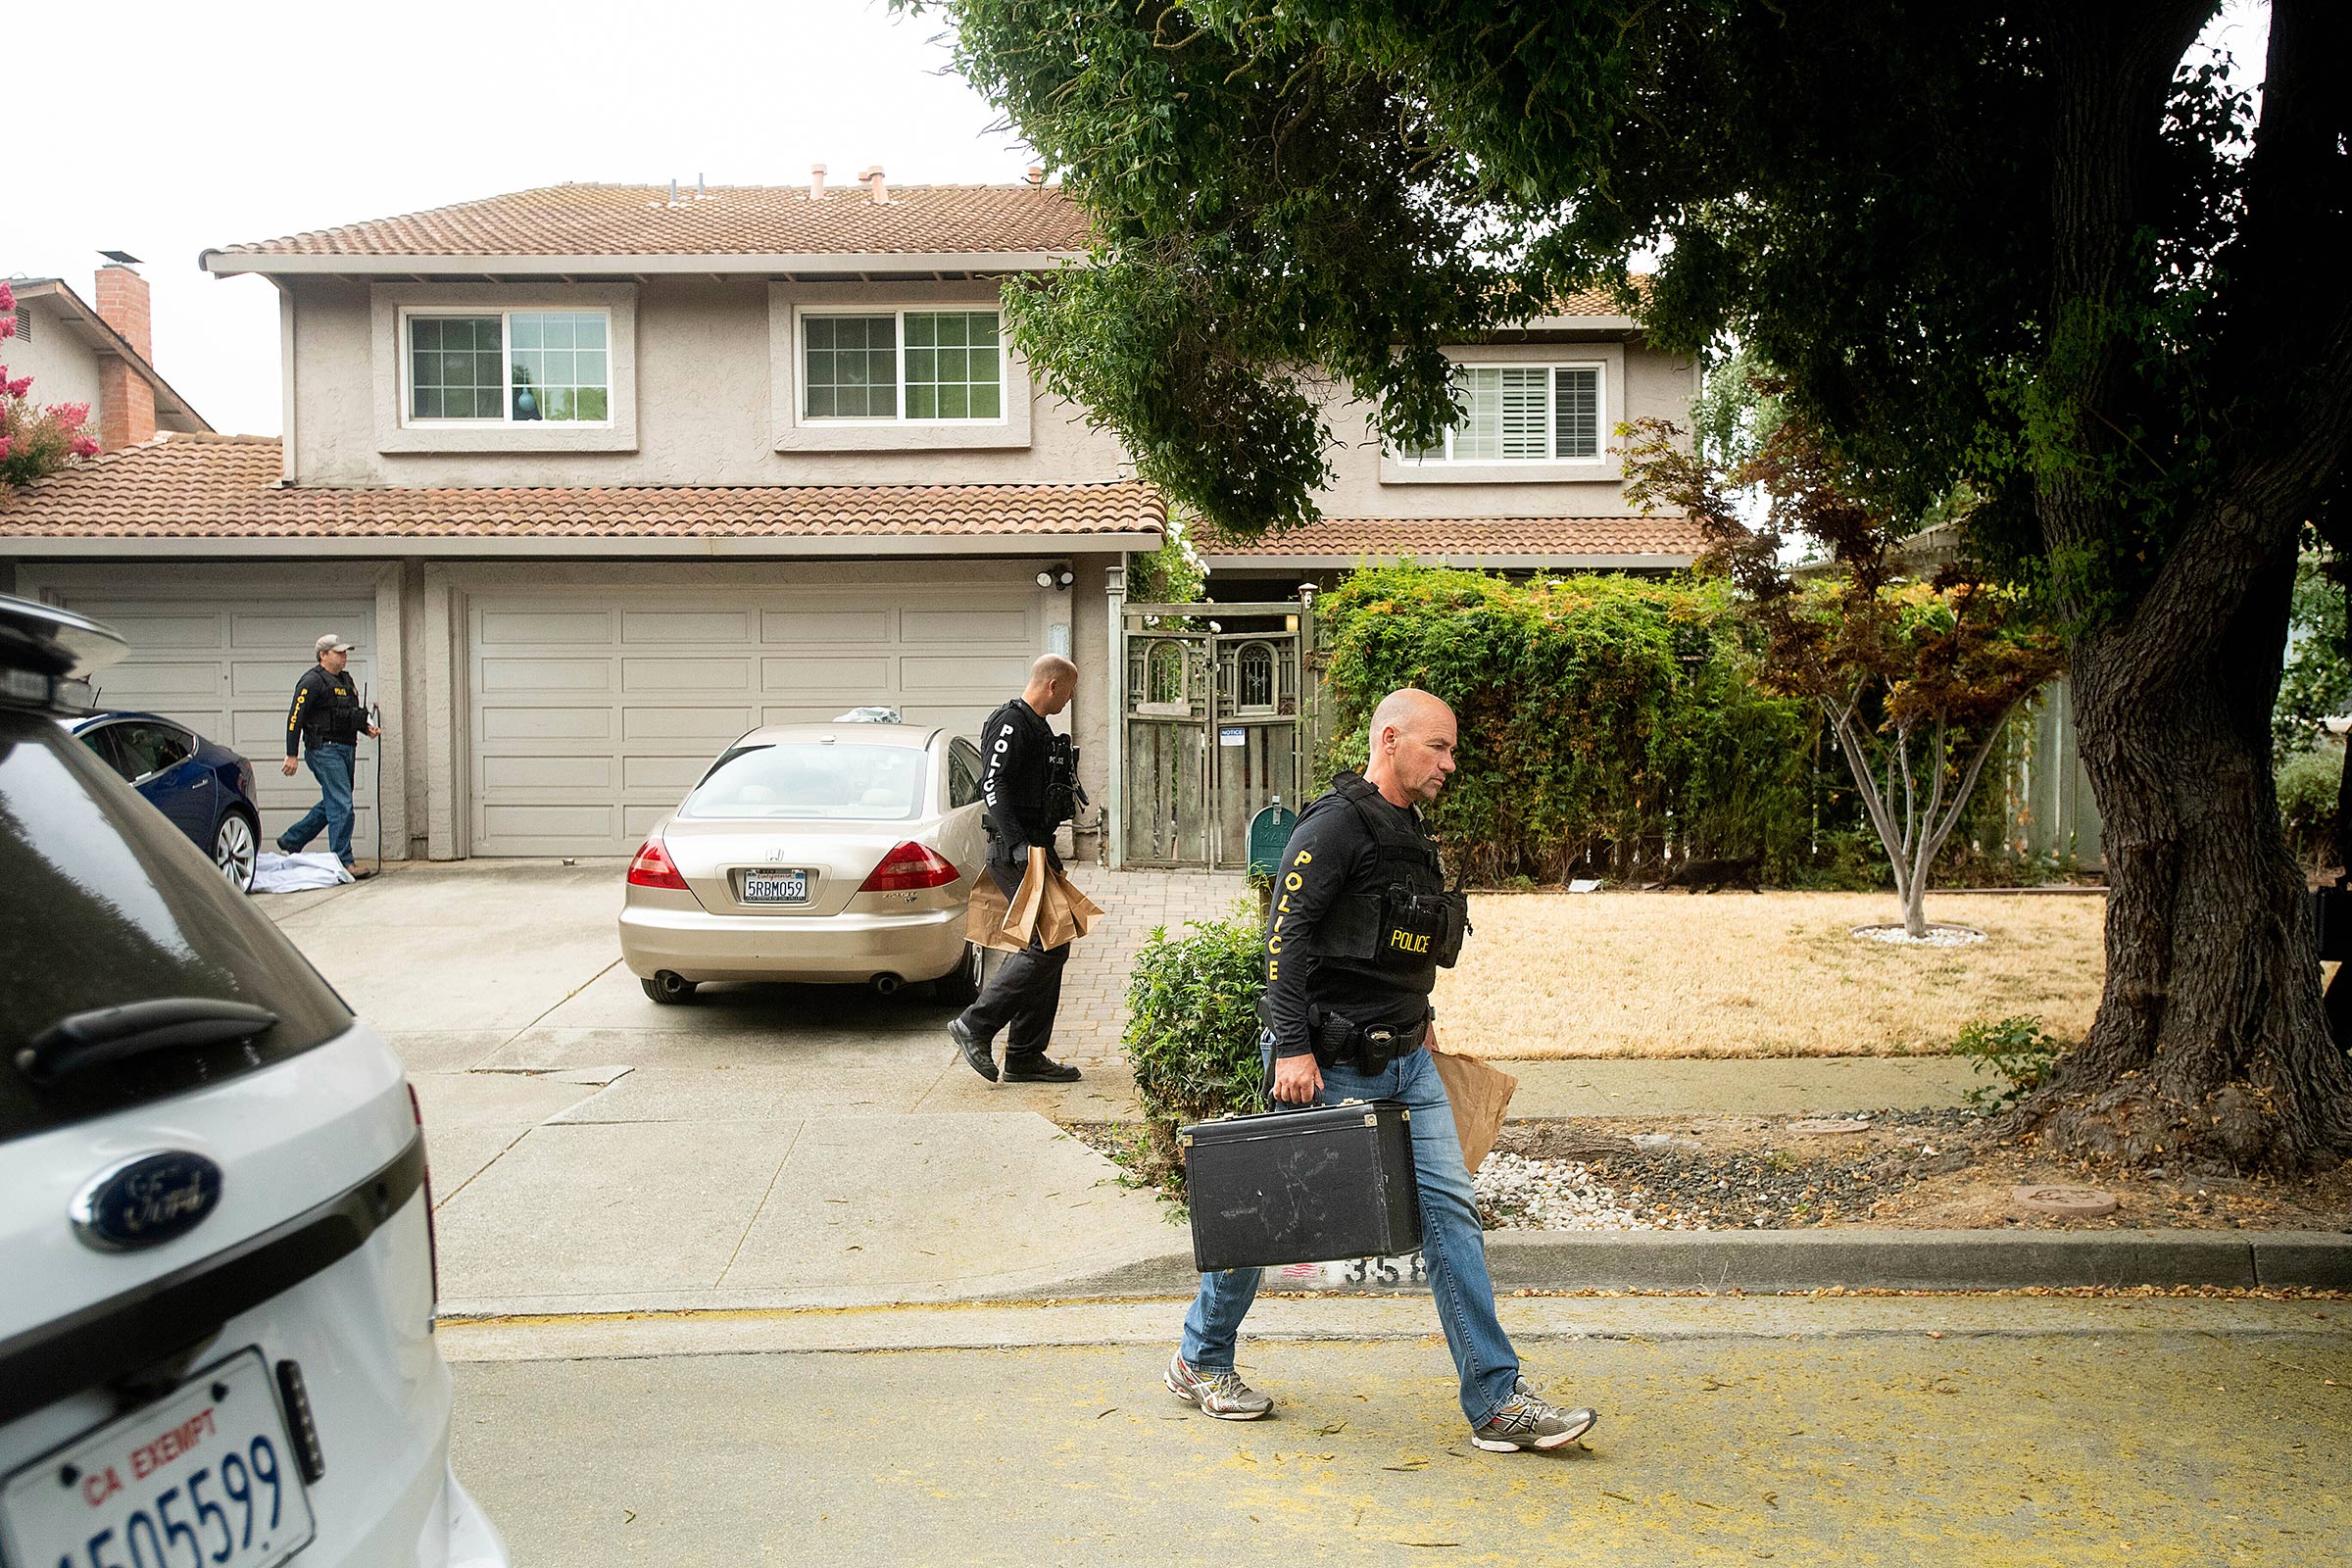 Police carry evidence bags from the home of the Gilroy shooting suspect. (Noah Berger—AP)